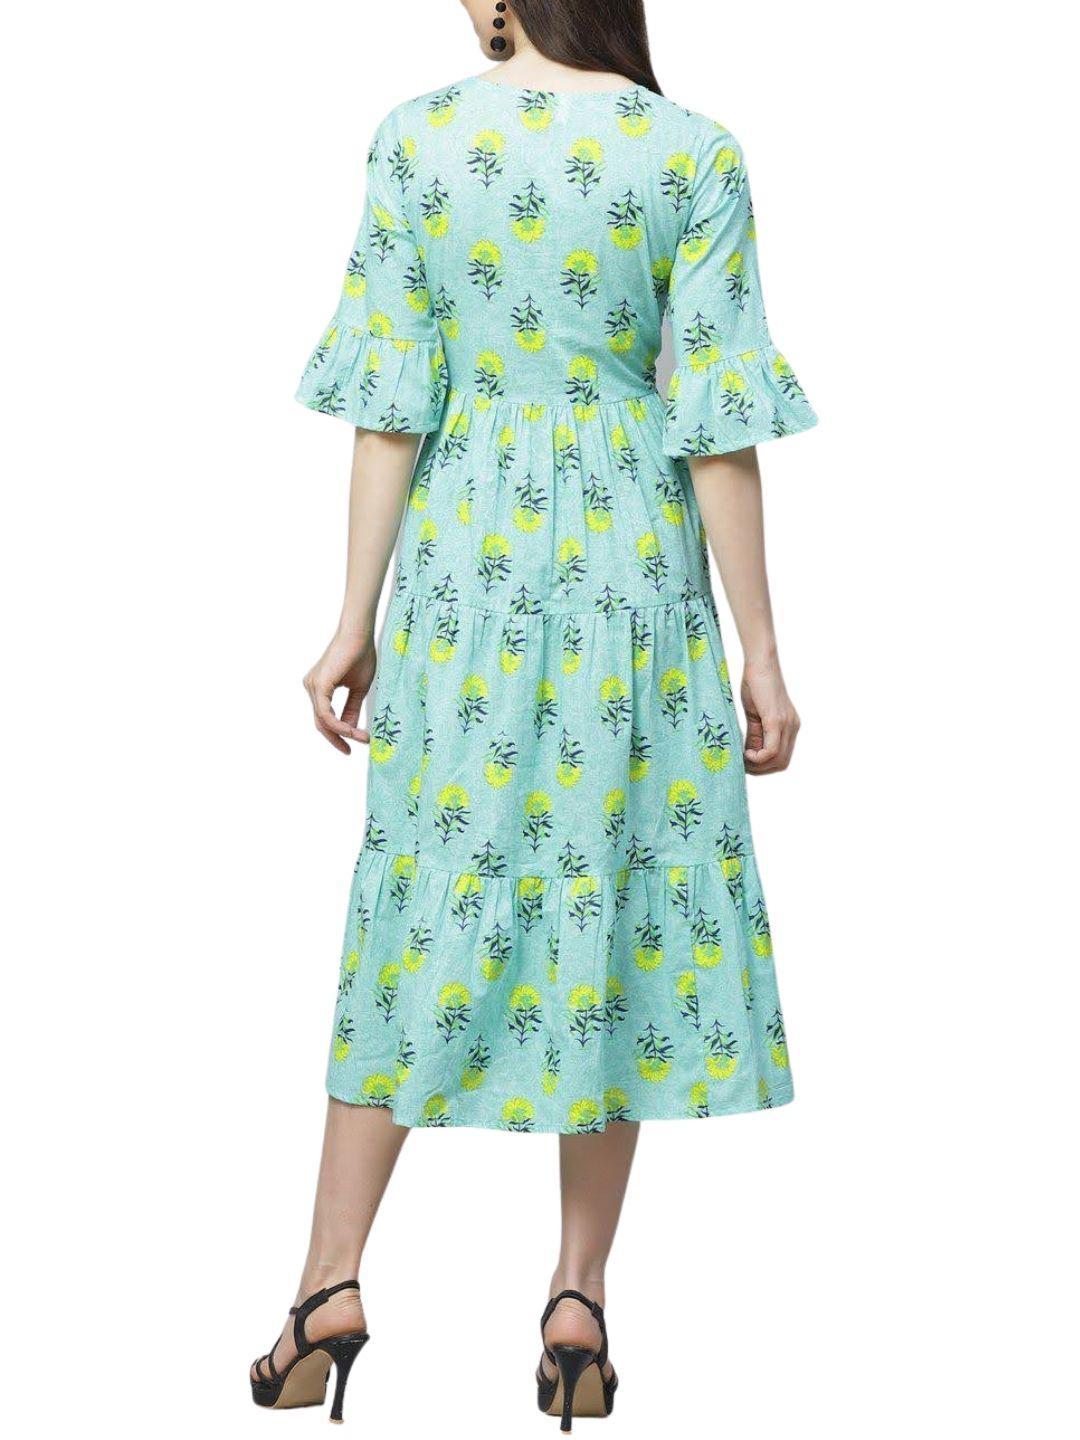 blue-yellow-floral-printed-tiered-a-line-dress-10204109BL, Women Clothing, Cotton Dress